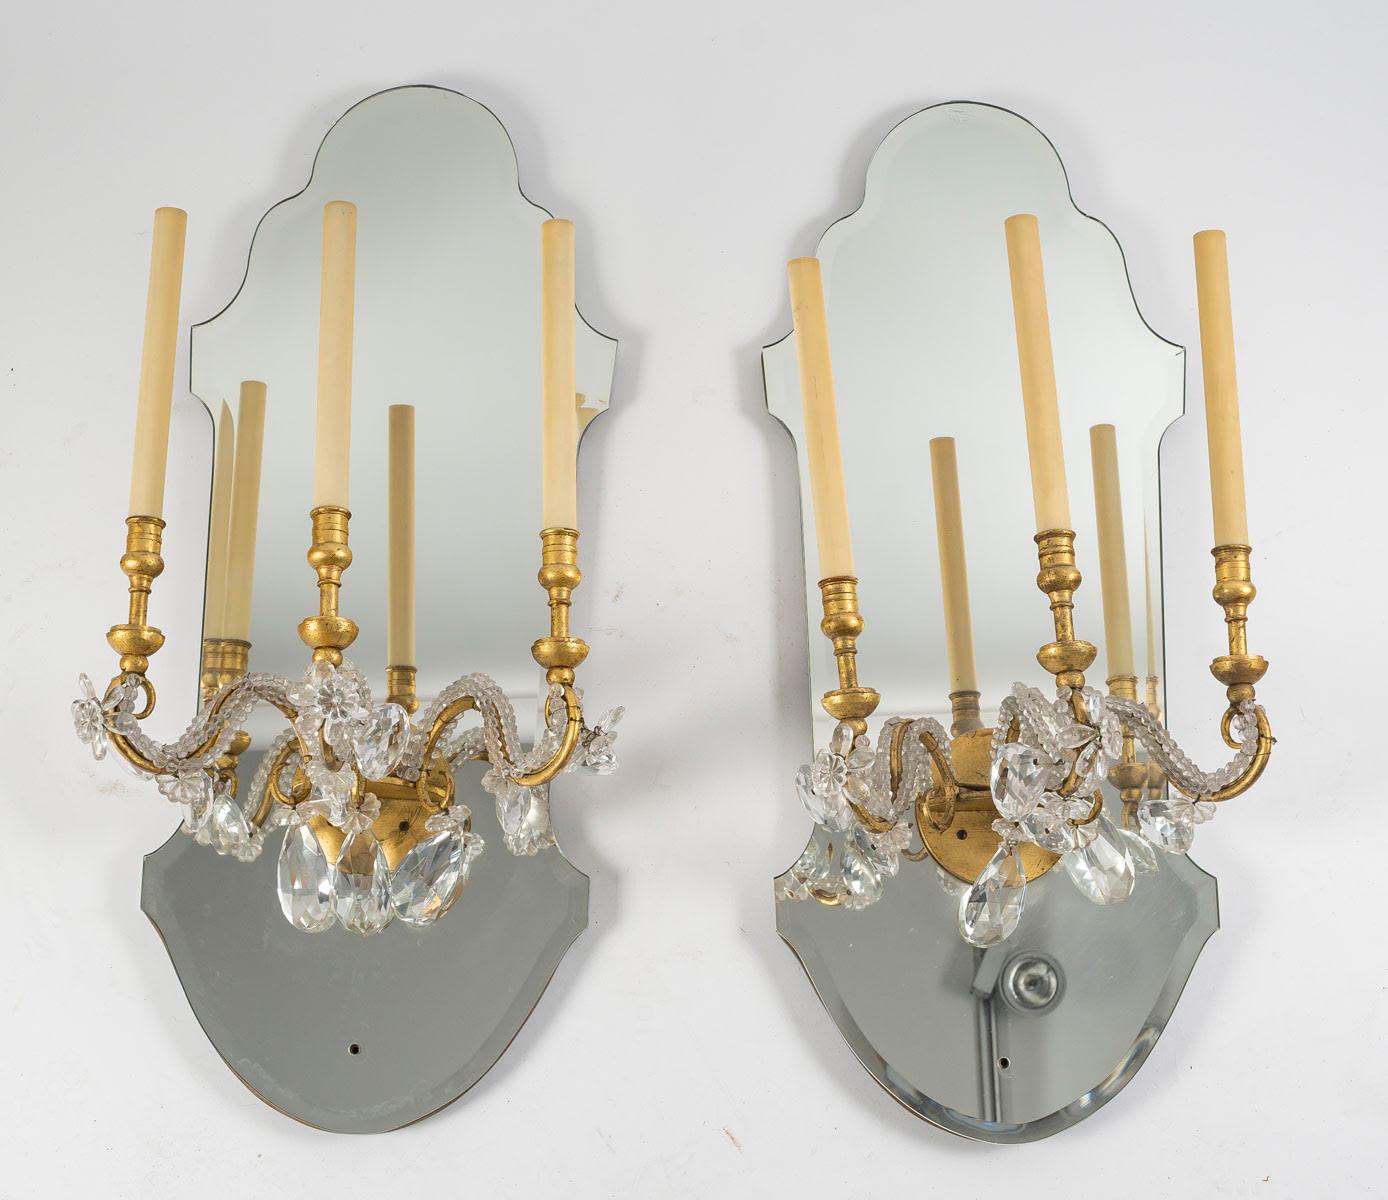 Mid-Century Modern Suite of 6 Gilded Iron and Mirror Sconces with Glass Drops, 1950-1960.